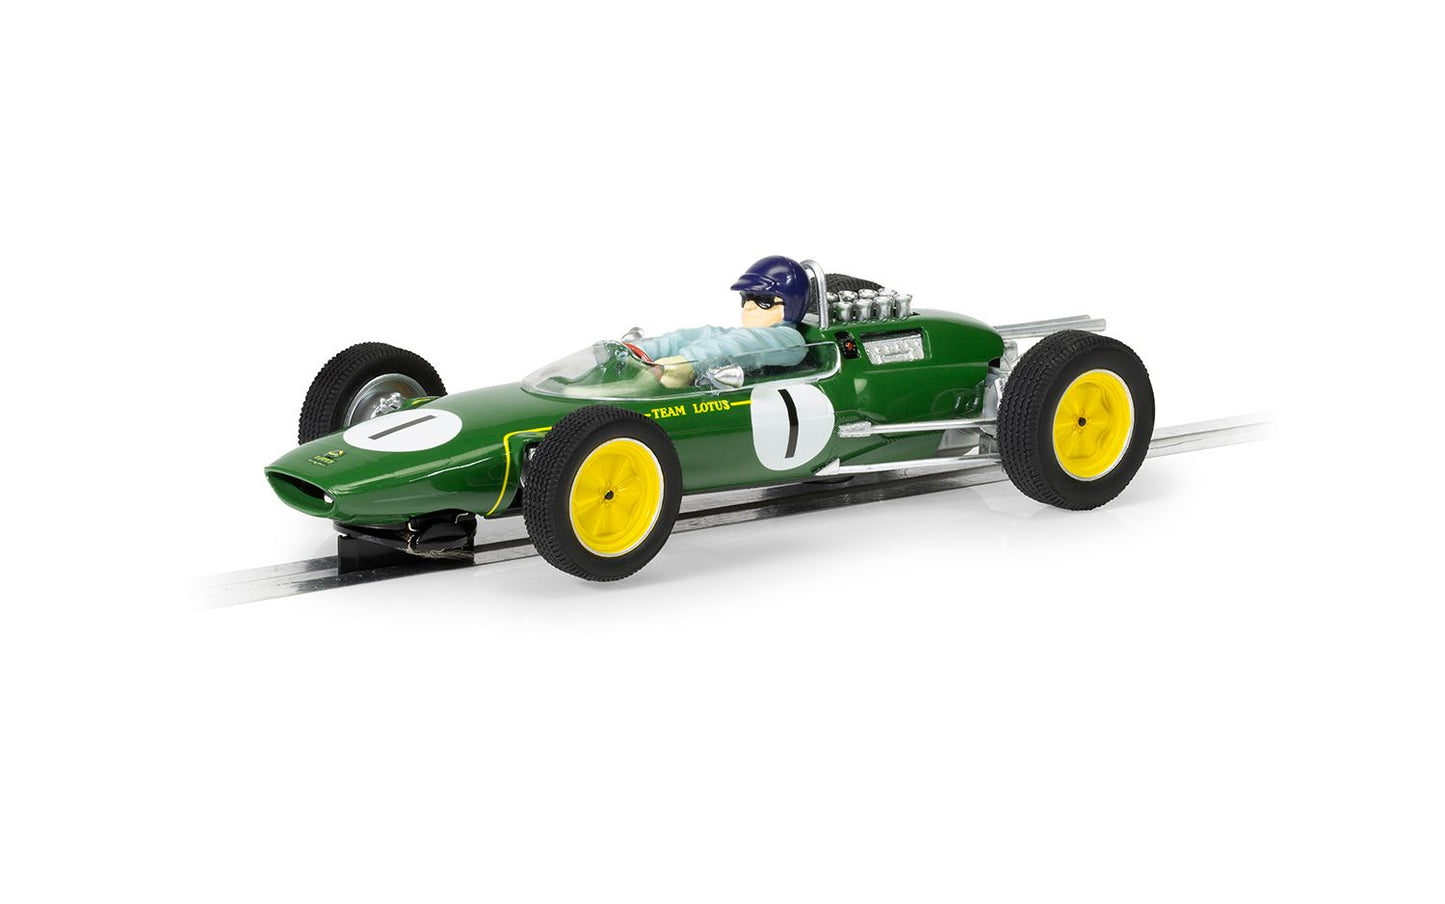 Jim Clark Collection Triple Pack